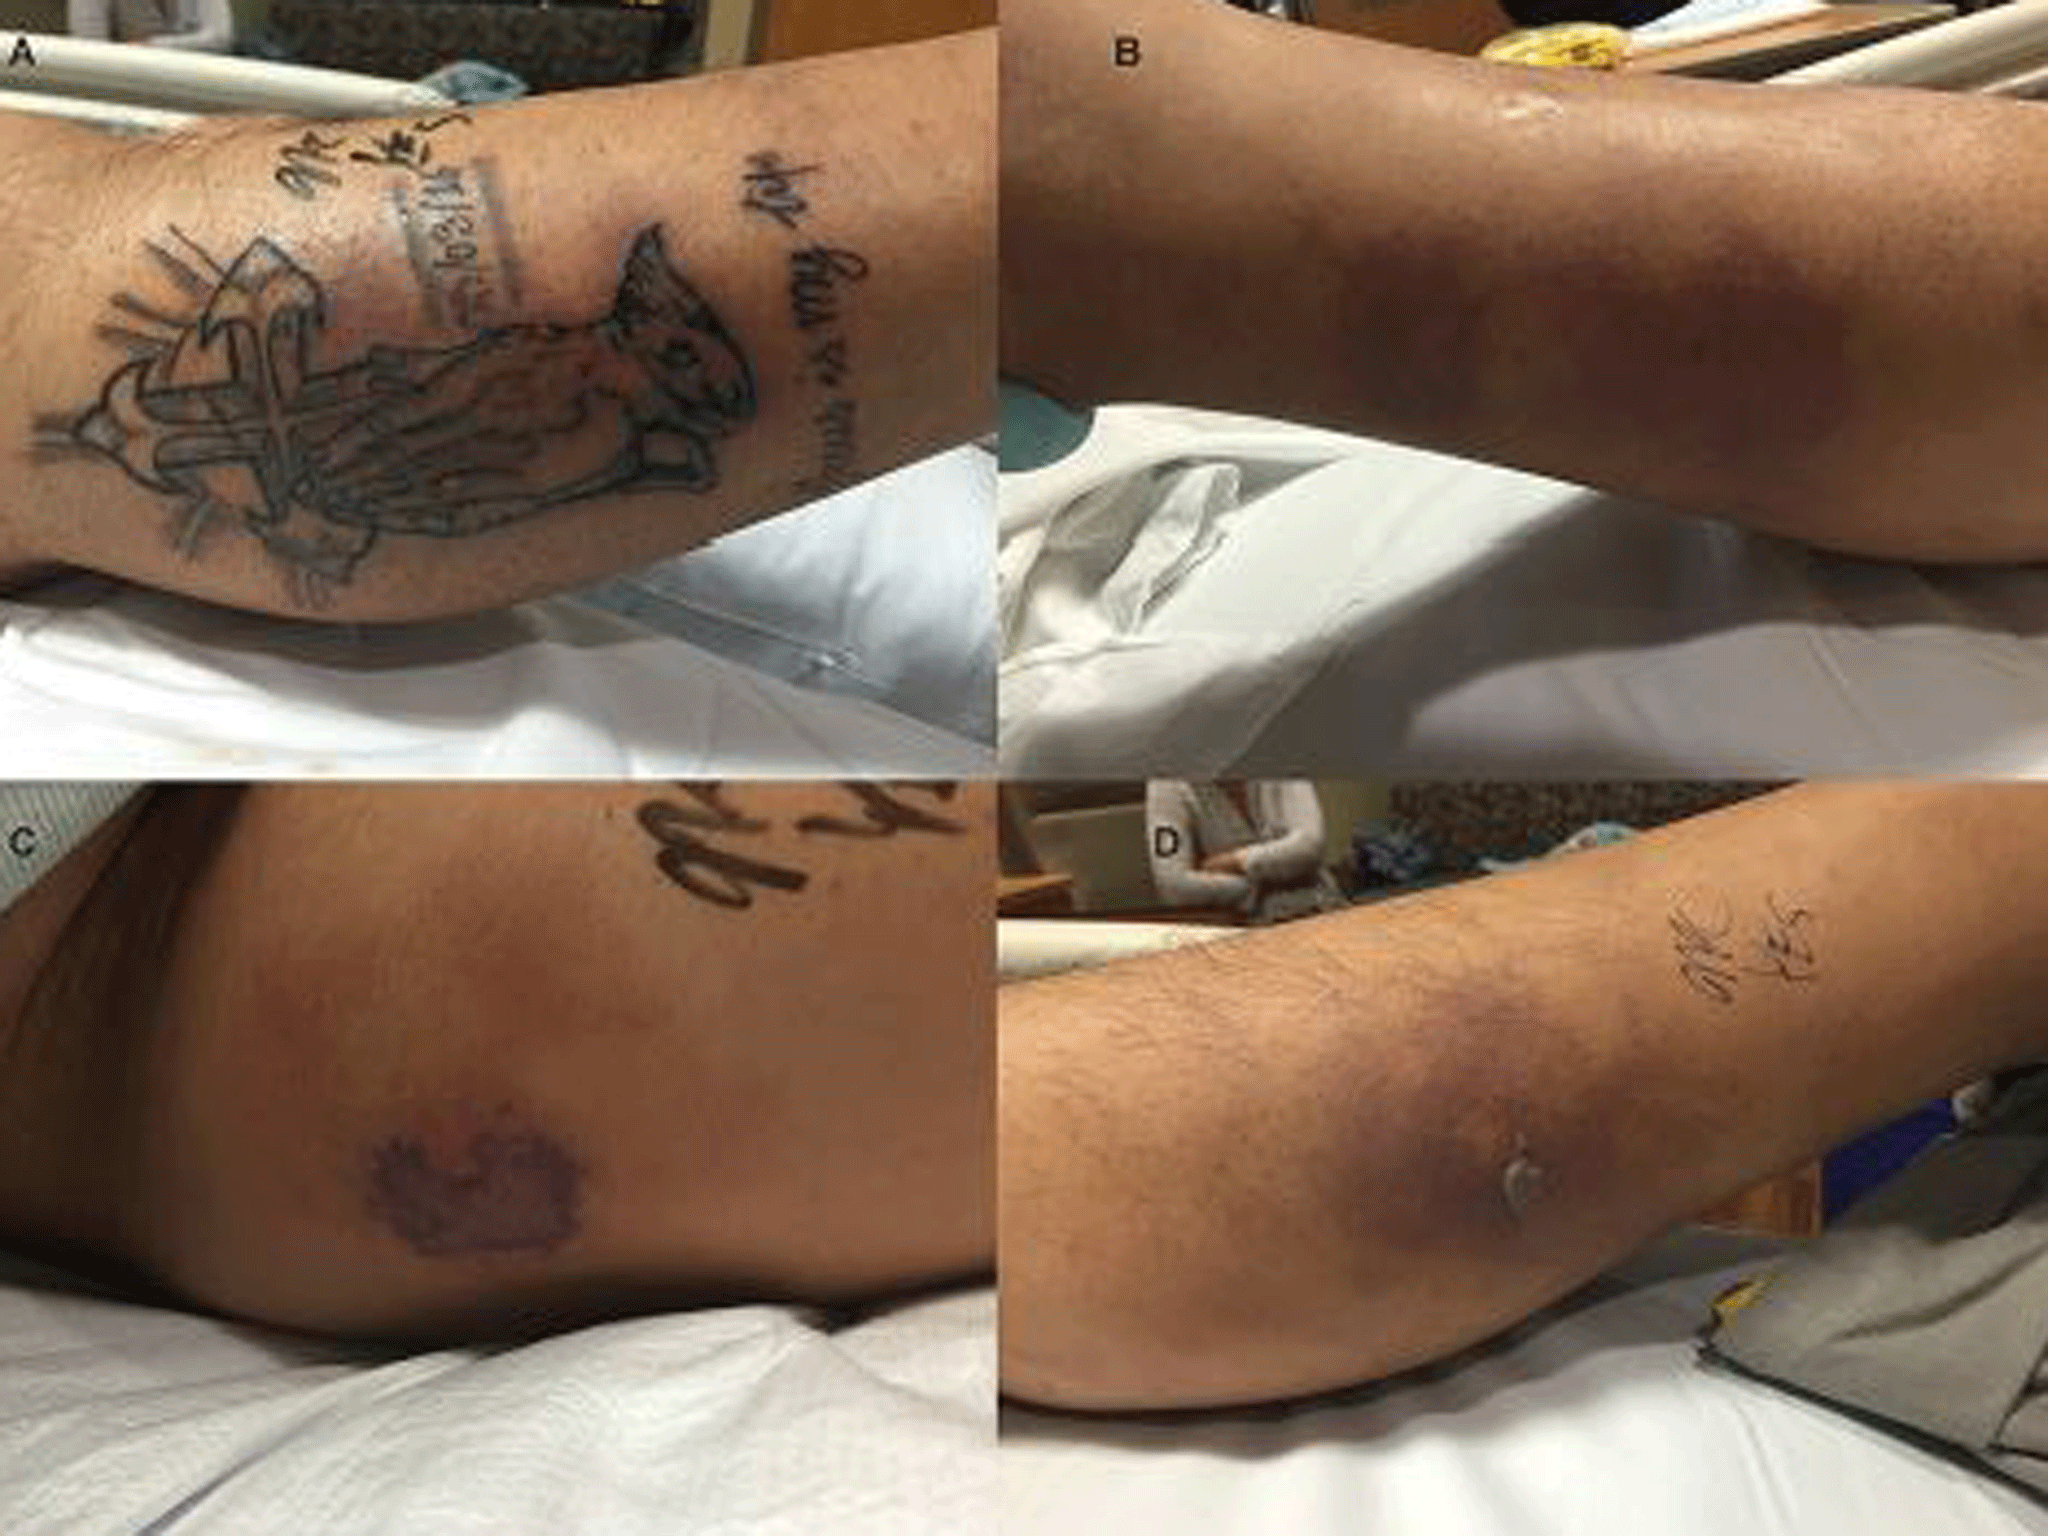 Dangers of swimming with a new tattoo exposed in alarming images of man who died from infection